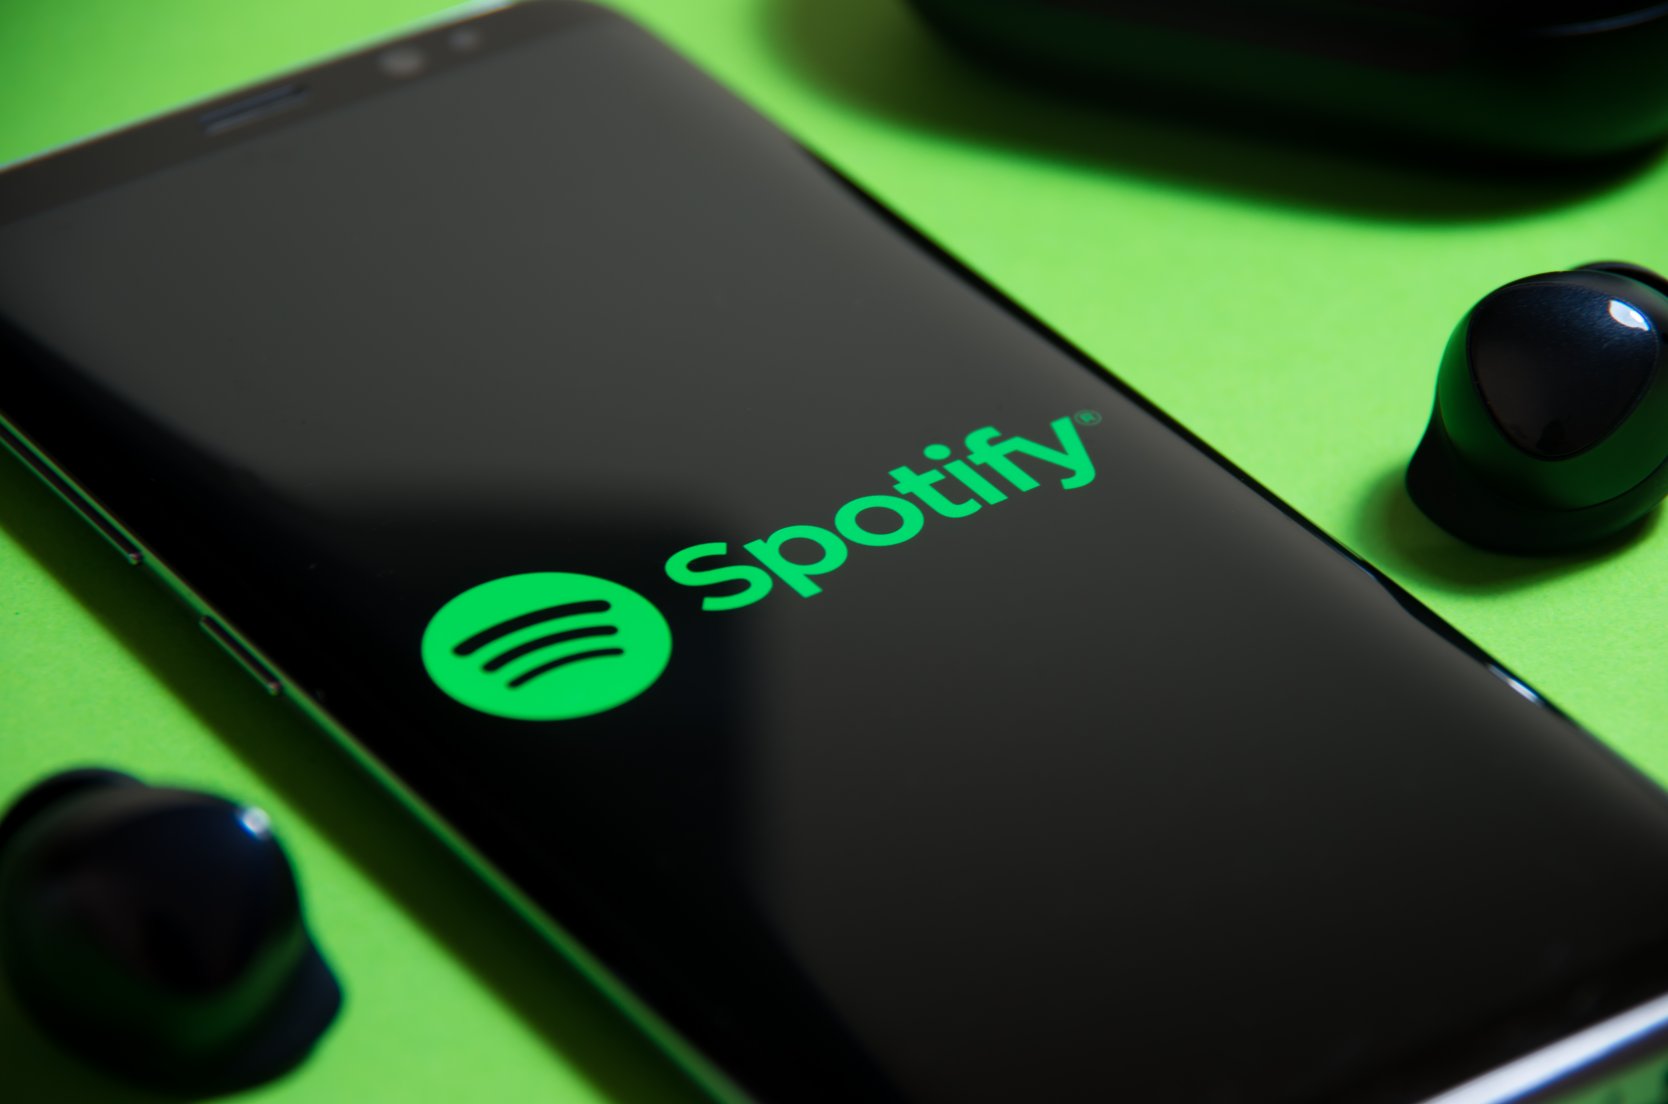 Spotify Stock Forecast Is Spotify A Good Stock To Buy?